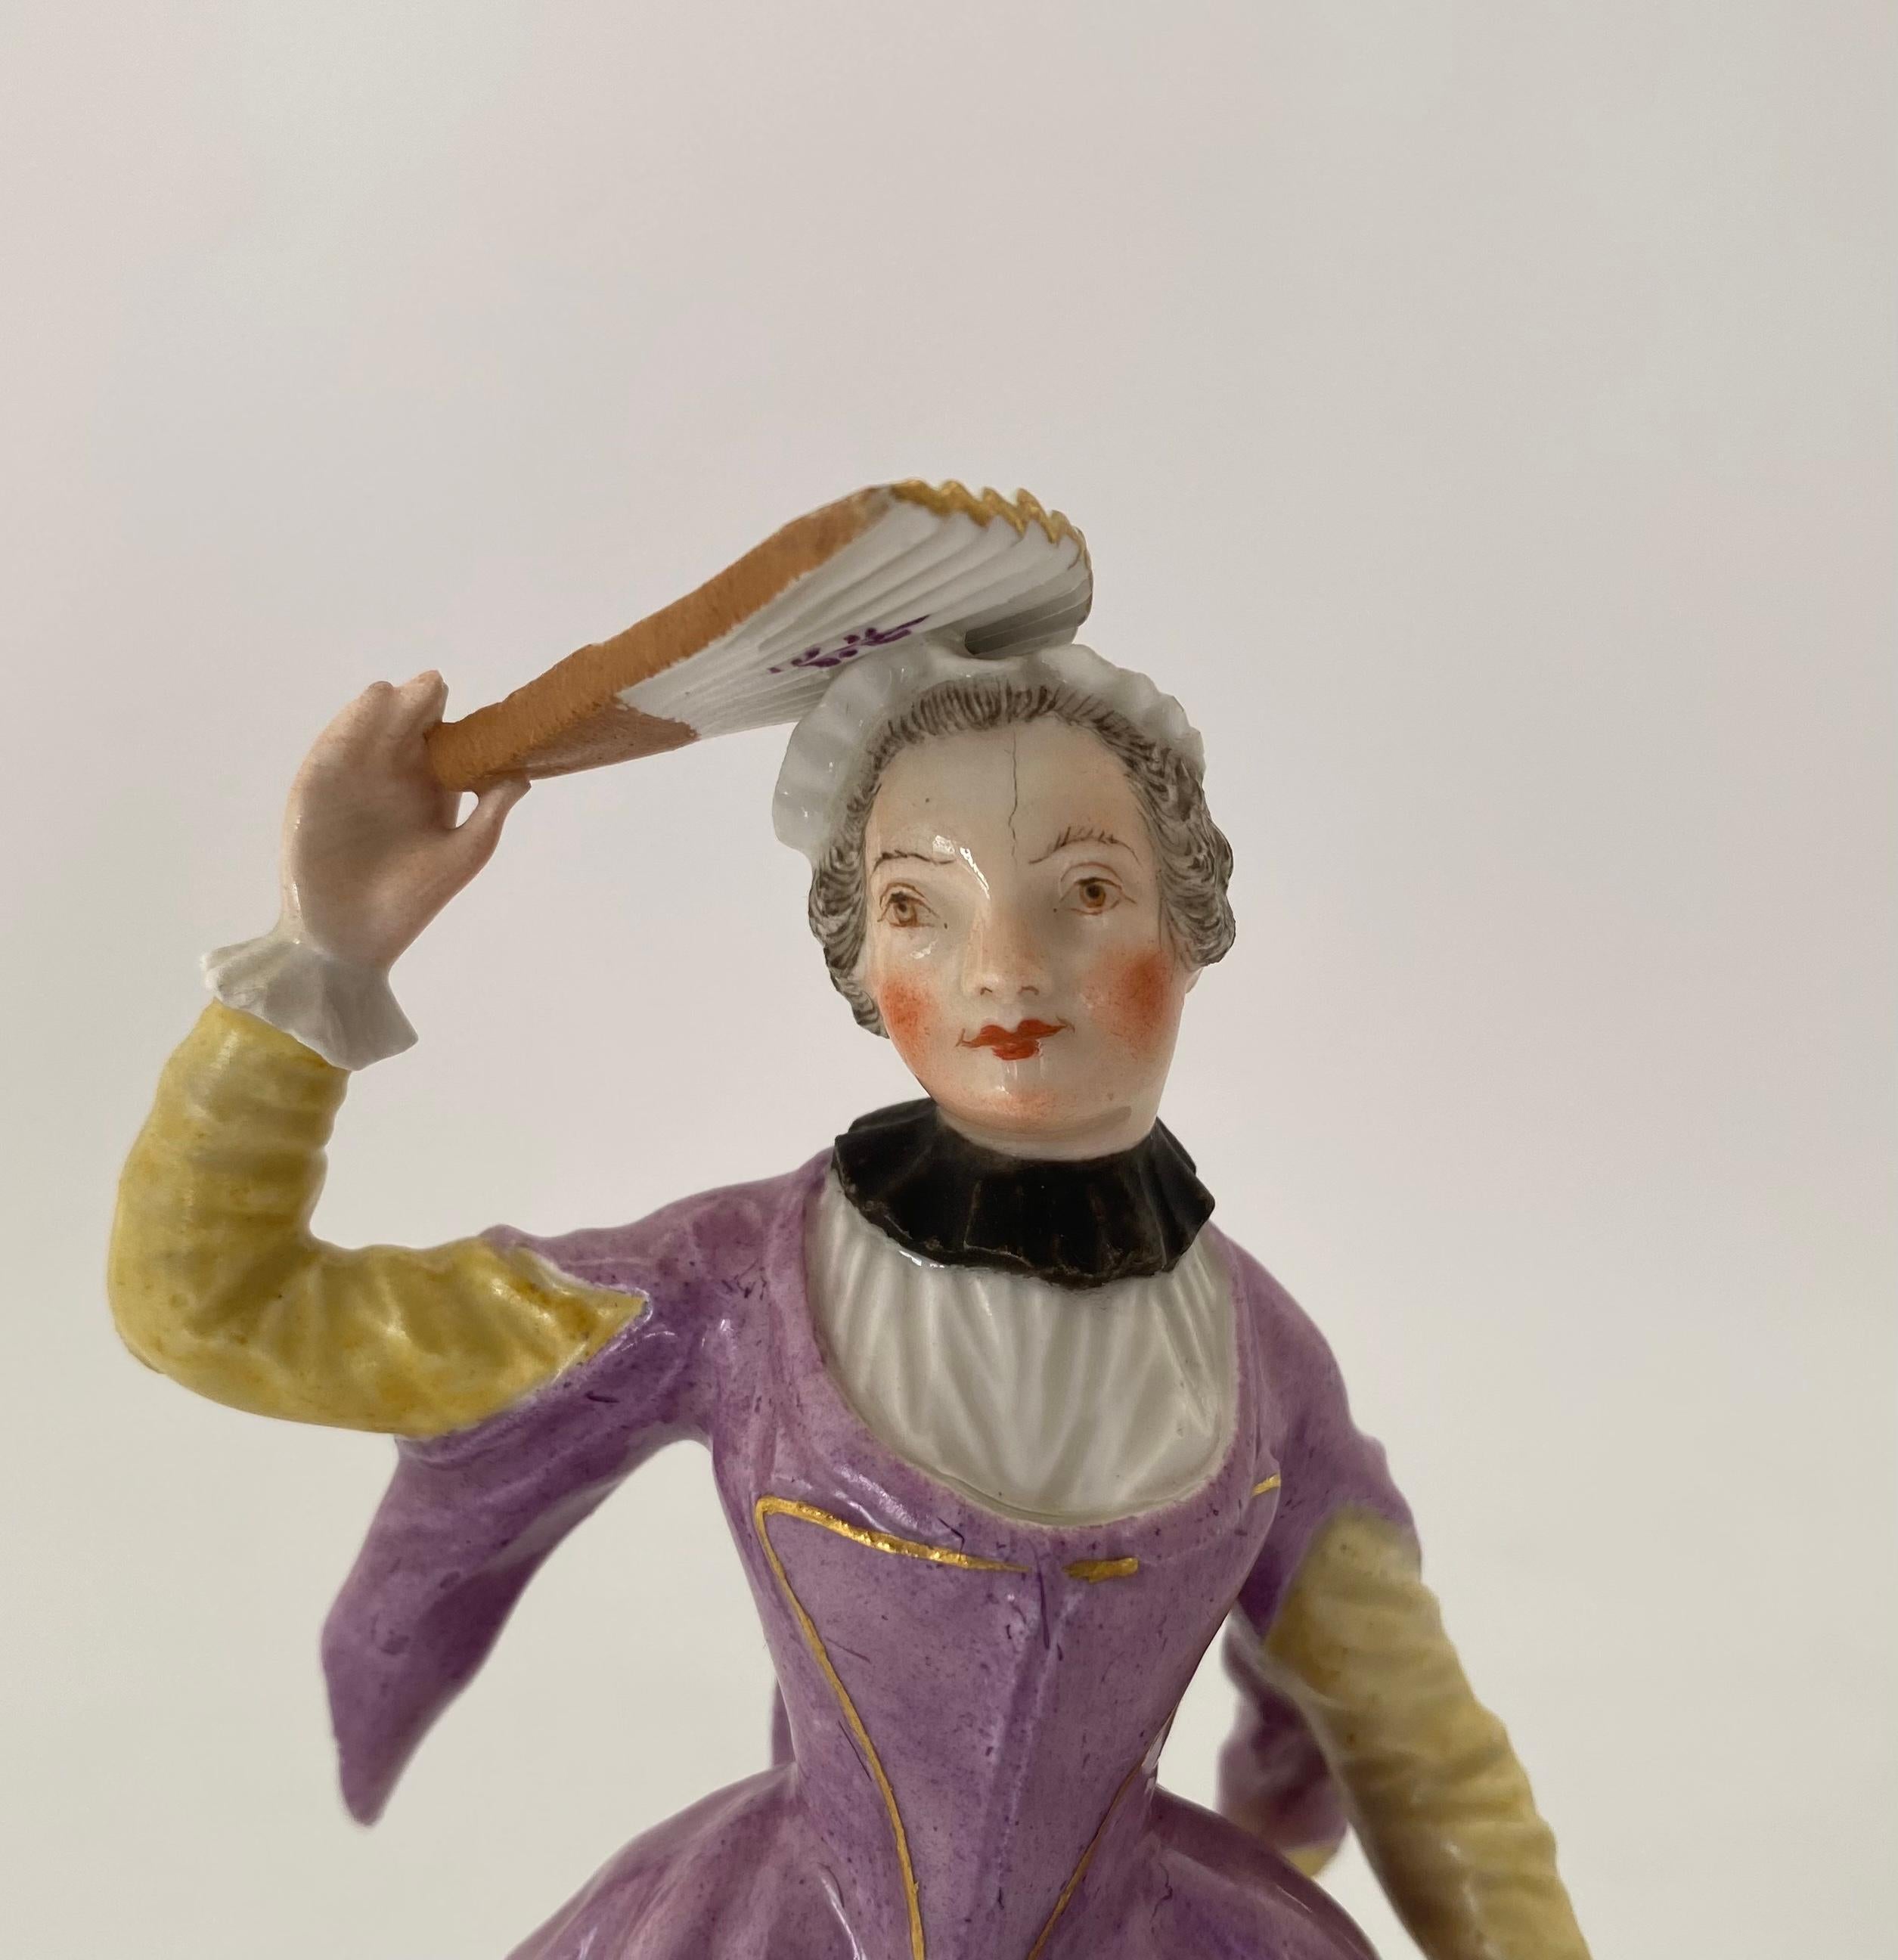 Meissen porcelain figure, ‘Polish Noblewoman’, c. 1750, modelled by Paul Reinicke. The elegant lady dressed in 18th Century costume, and holding a fan in her right hand. Set upon a circular rocaille moulded base, edged in gilt.
Medium: